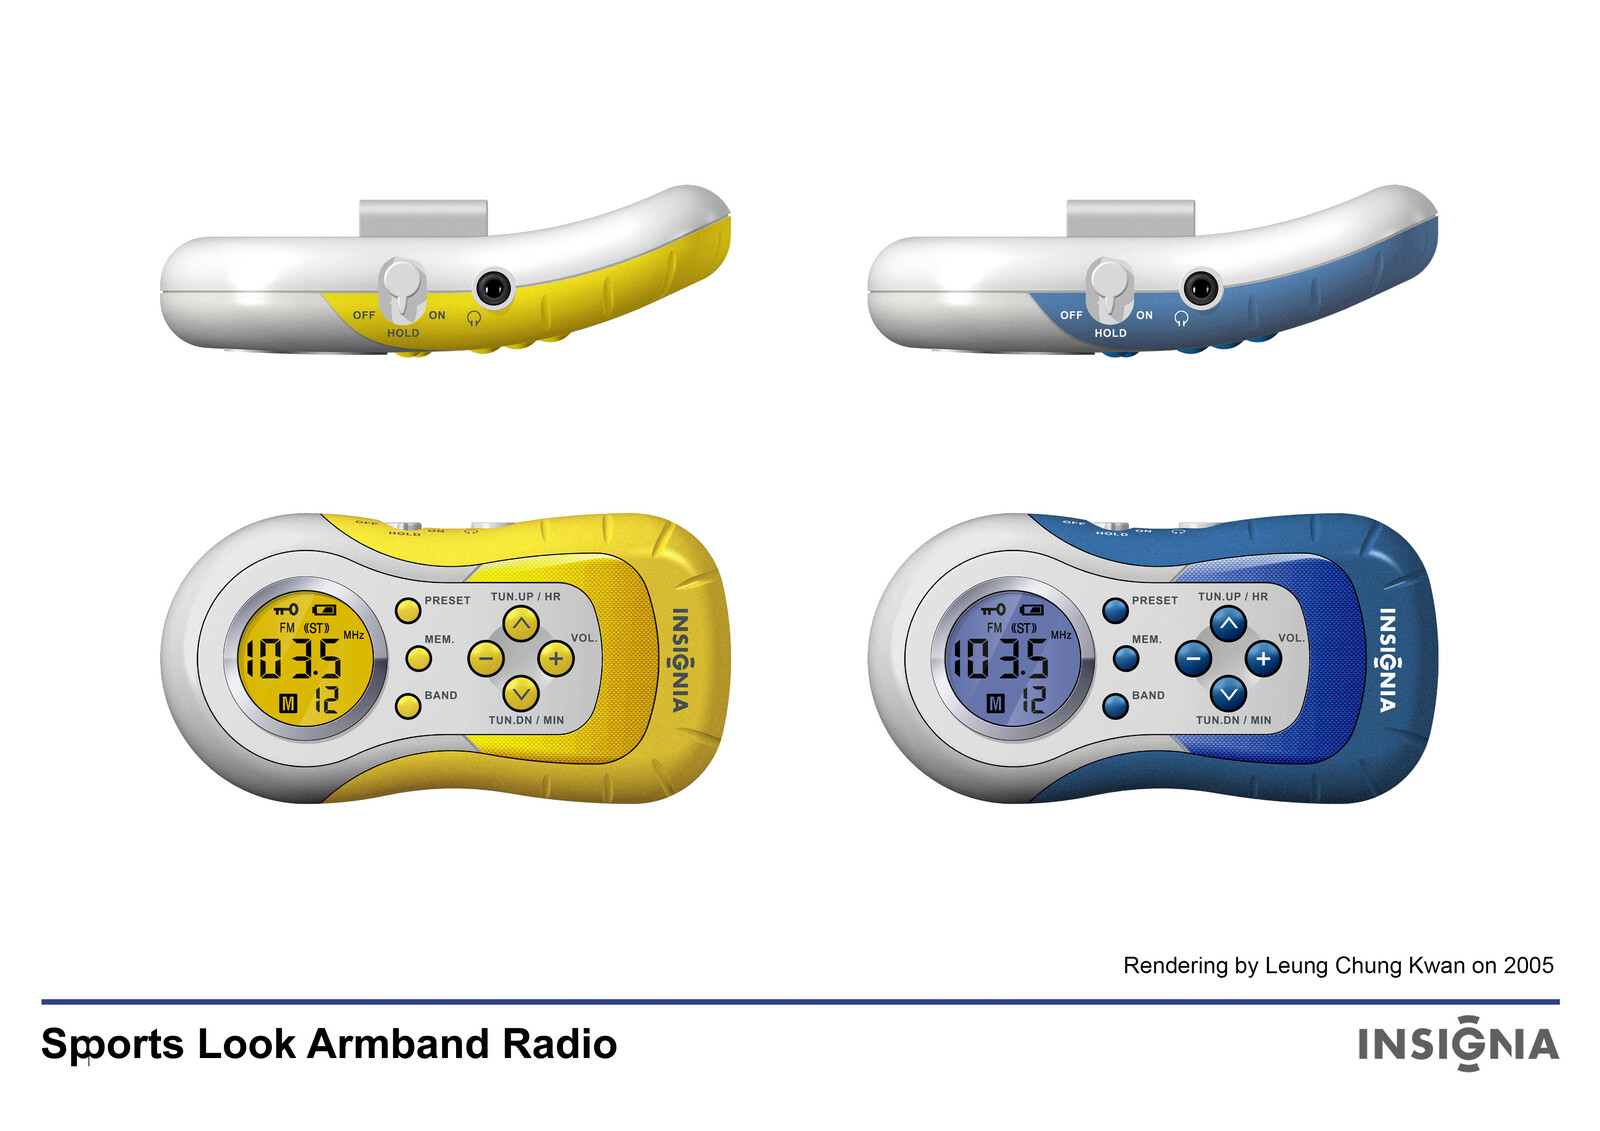 💎 Sports Look Armband Radio | Rendering by Leung Chung Kwan on 2005 💎
Brand Name︰INSIGNA | Client︰Star Light Electronics Co., Ltd.
Product Color Rendering︰http://bit.ly/sl05-armband-radio-v2